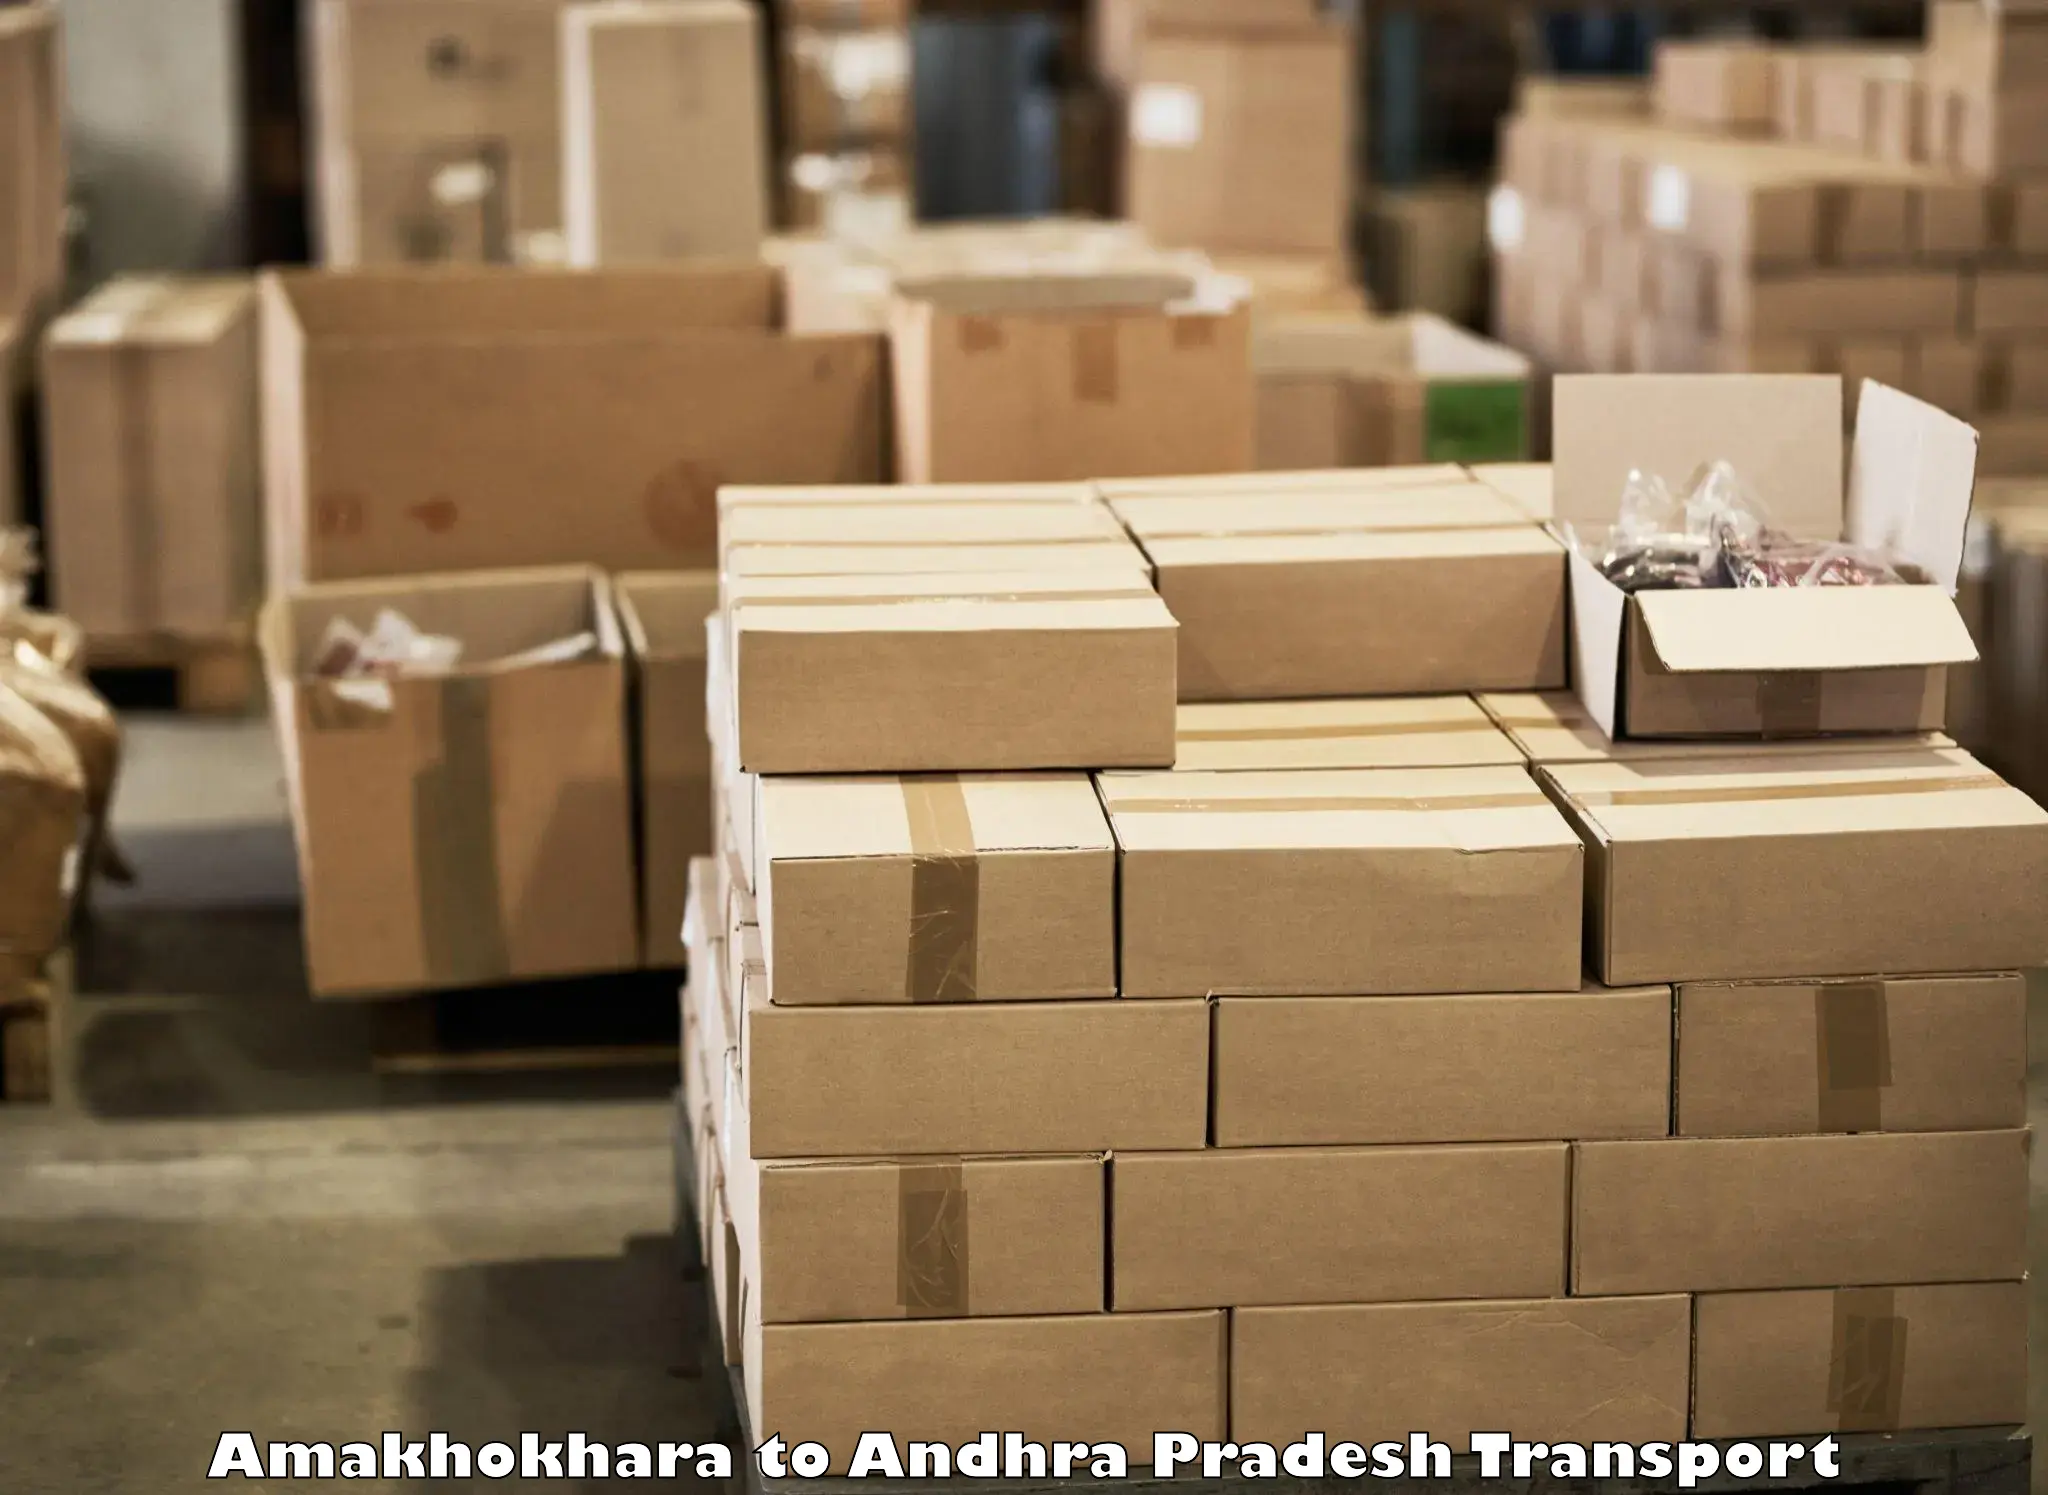 Goods delivery service Amakhokhara to Andhra Pradesh